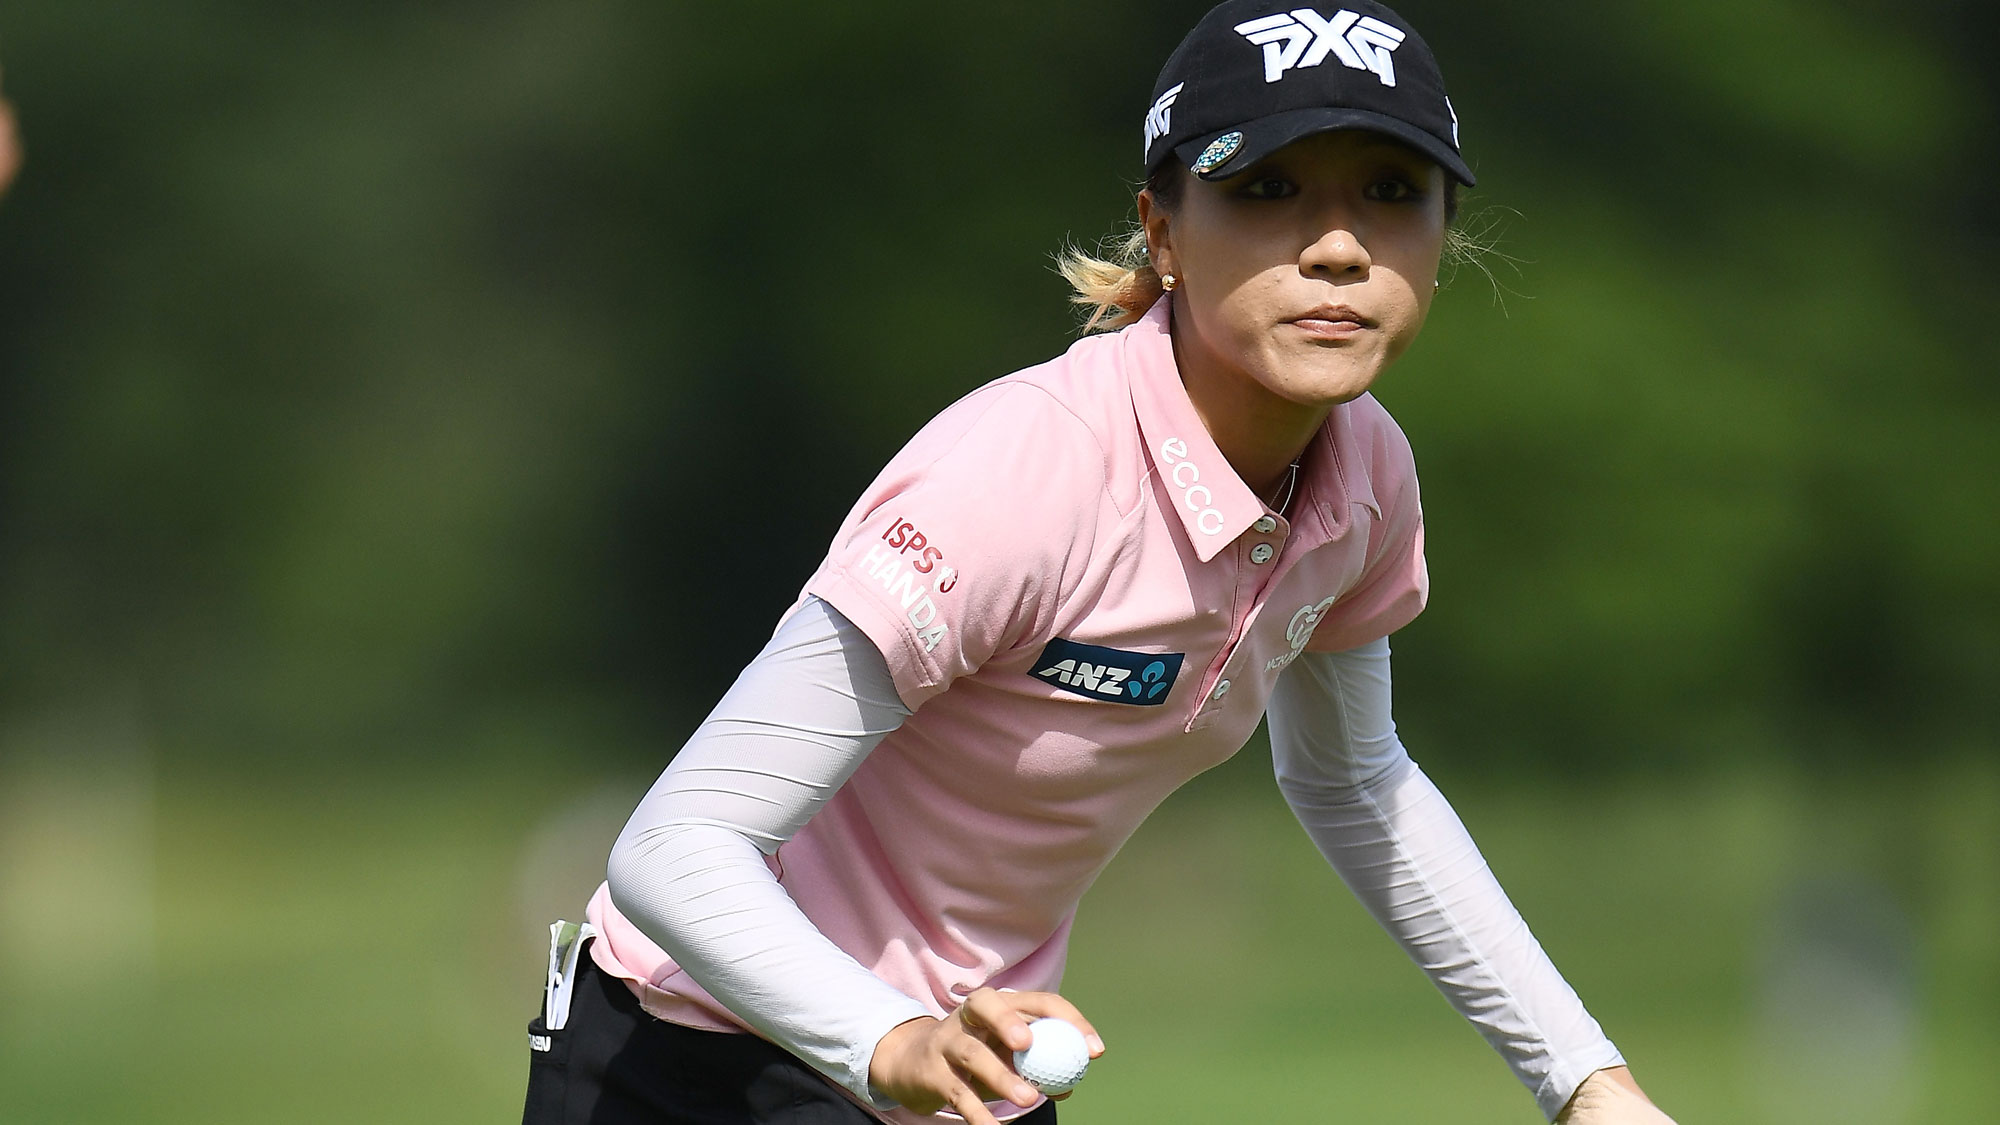 Lydia Ko After a Birdie at the Meijer LPGA Classic 